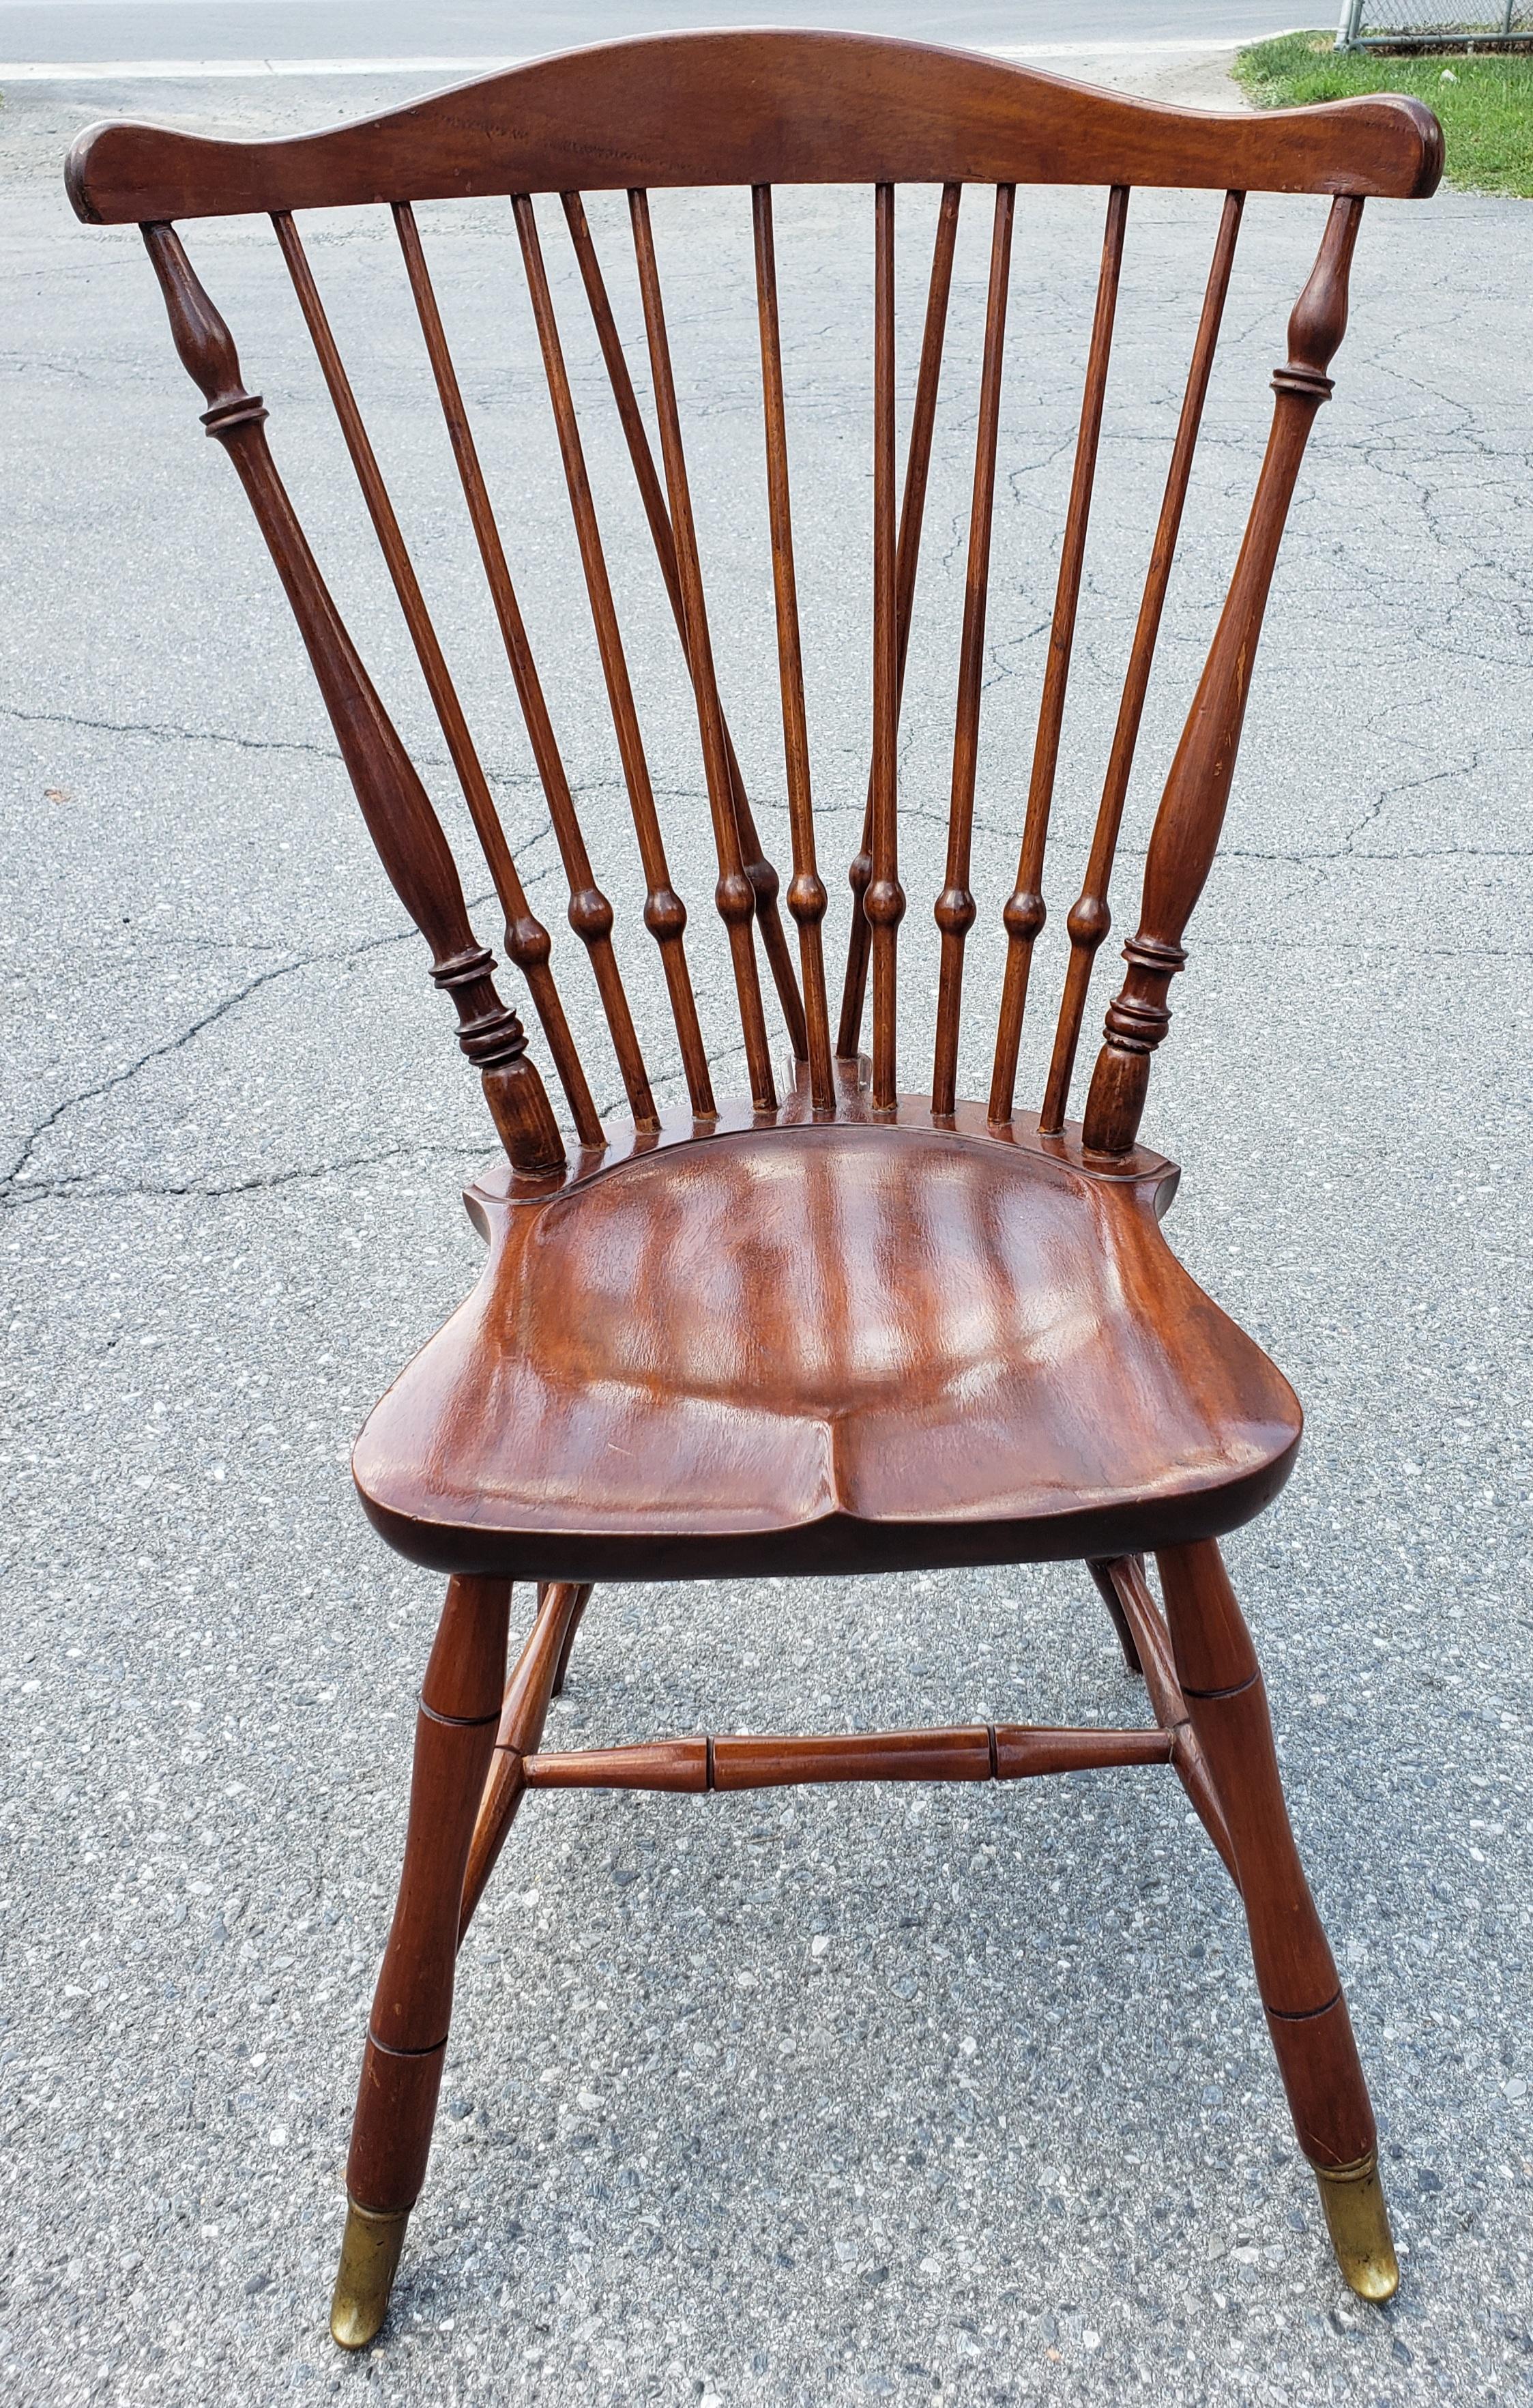 An exceptional hand crafted Mid-Century Mahogany Brace Back Sadle Seat Windsor Chair With high Brass Leg Caps. Recently refinished and in great vintage condition. Measures 23.5